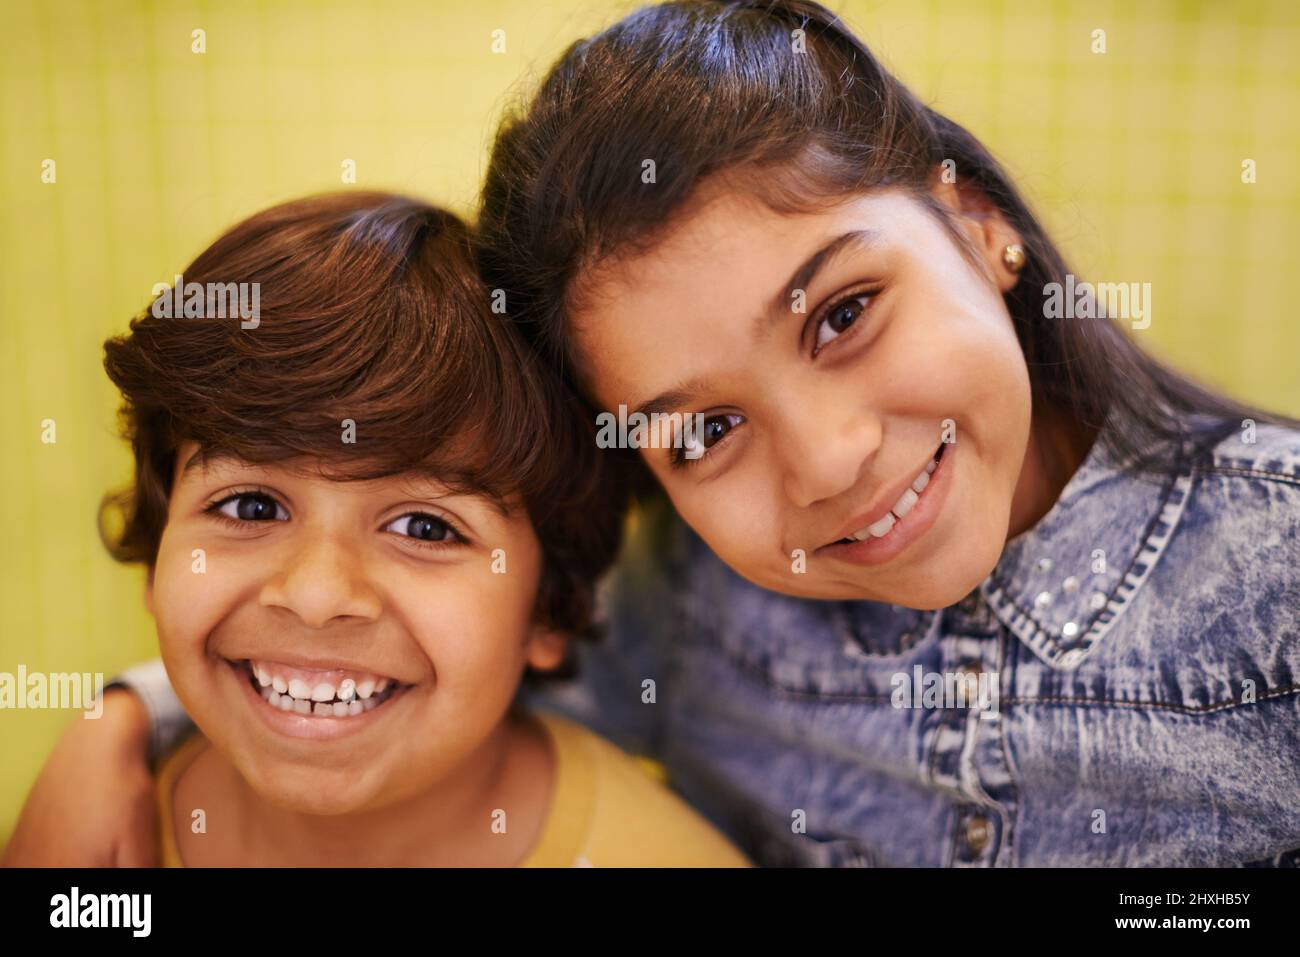 Best friends for a lifetime. Portrait of two siblings standing together indoors. Stock Photo